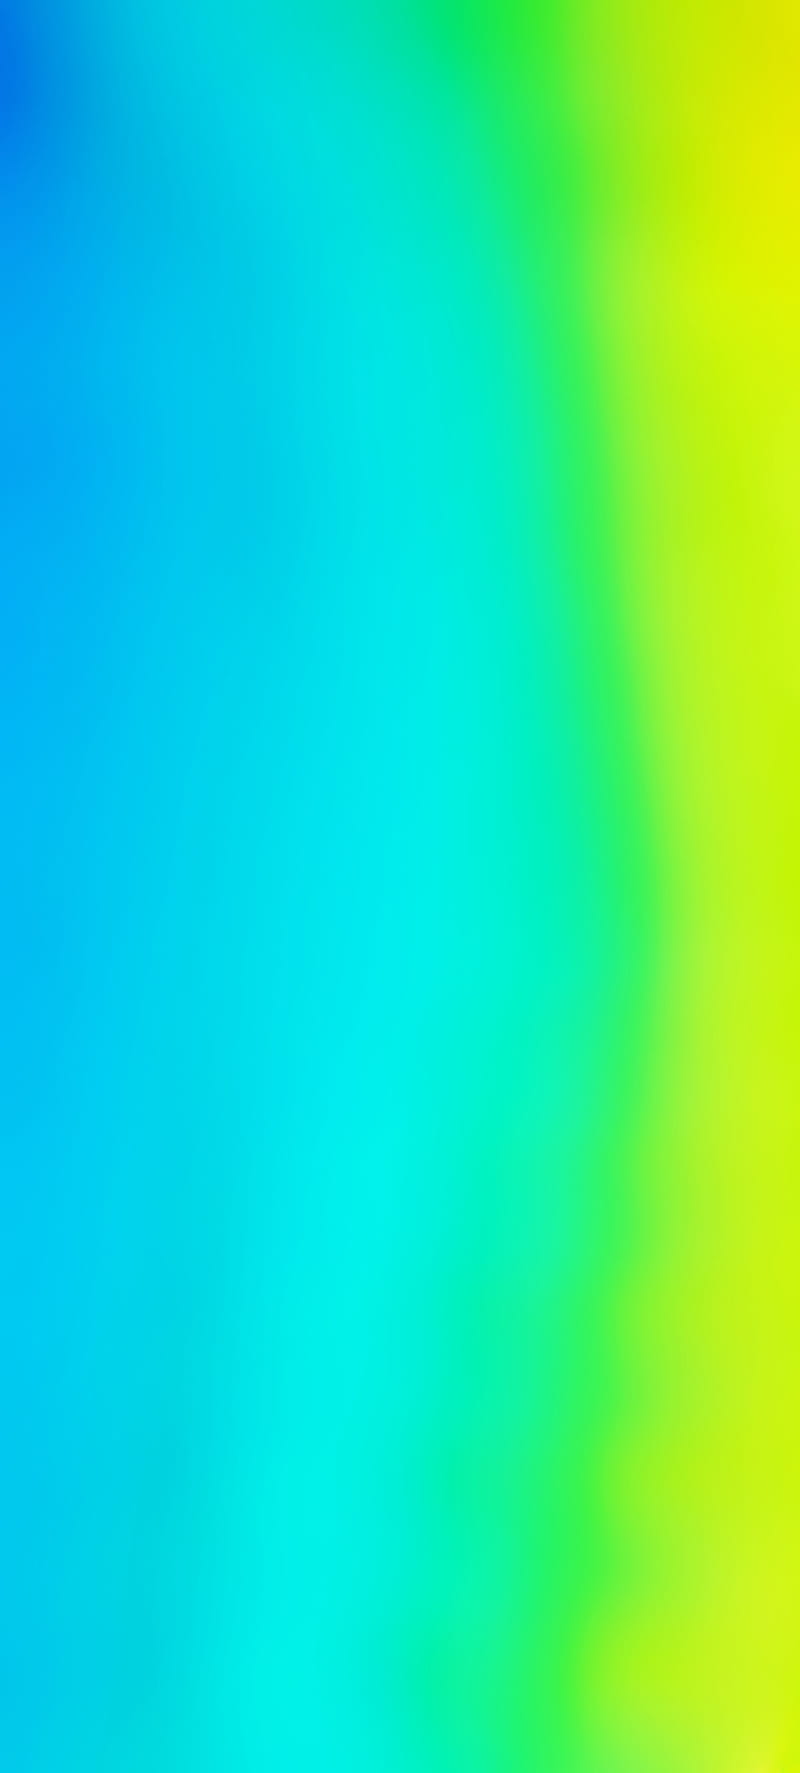 P30 pro, huawei, p20, mate, 20, 30, android, honor, gradient, HD phone wallpaper